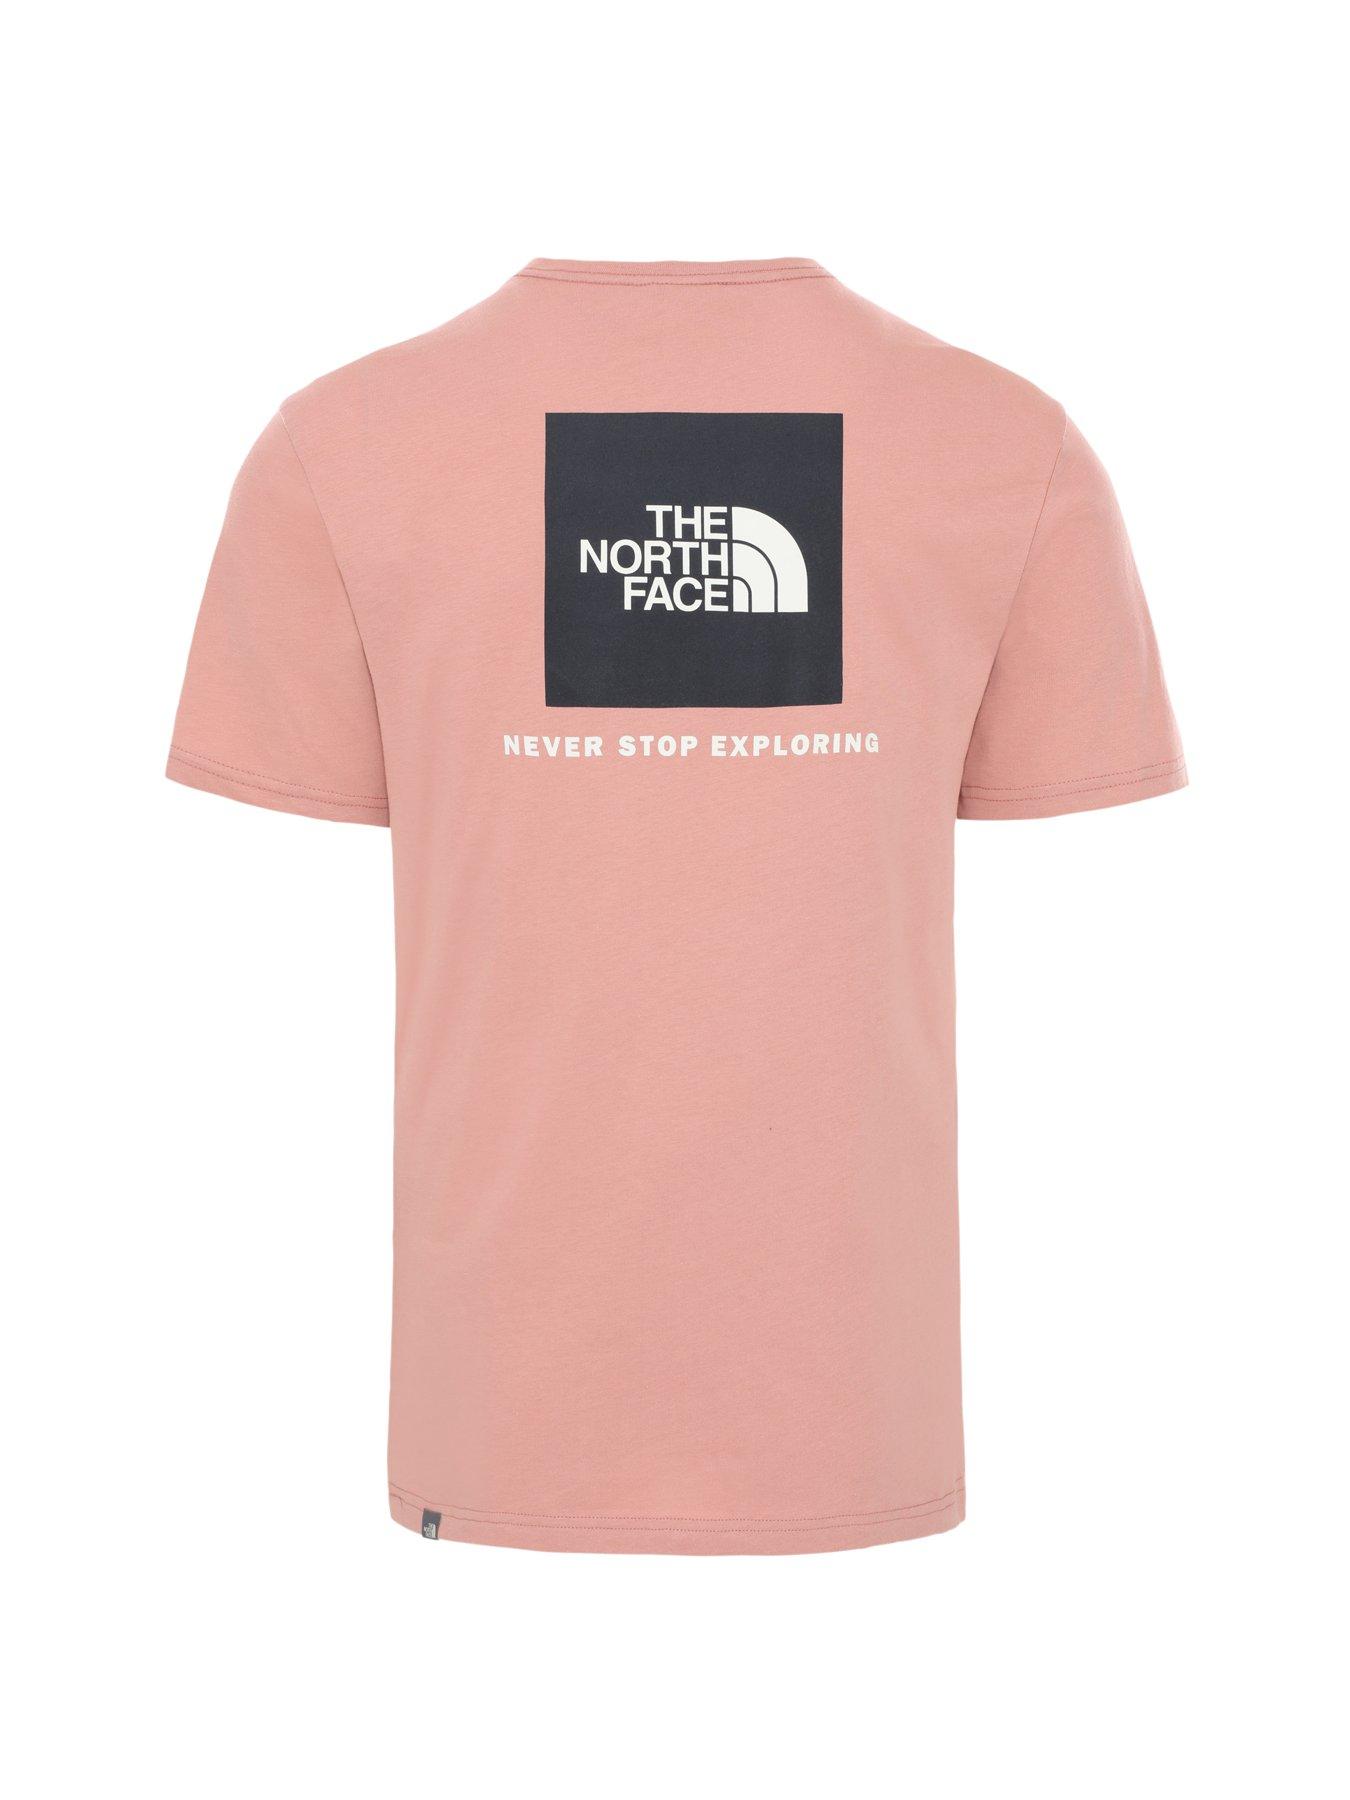 north face pink top